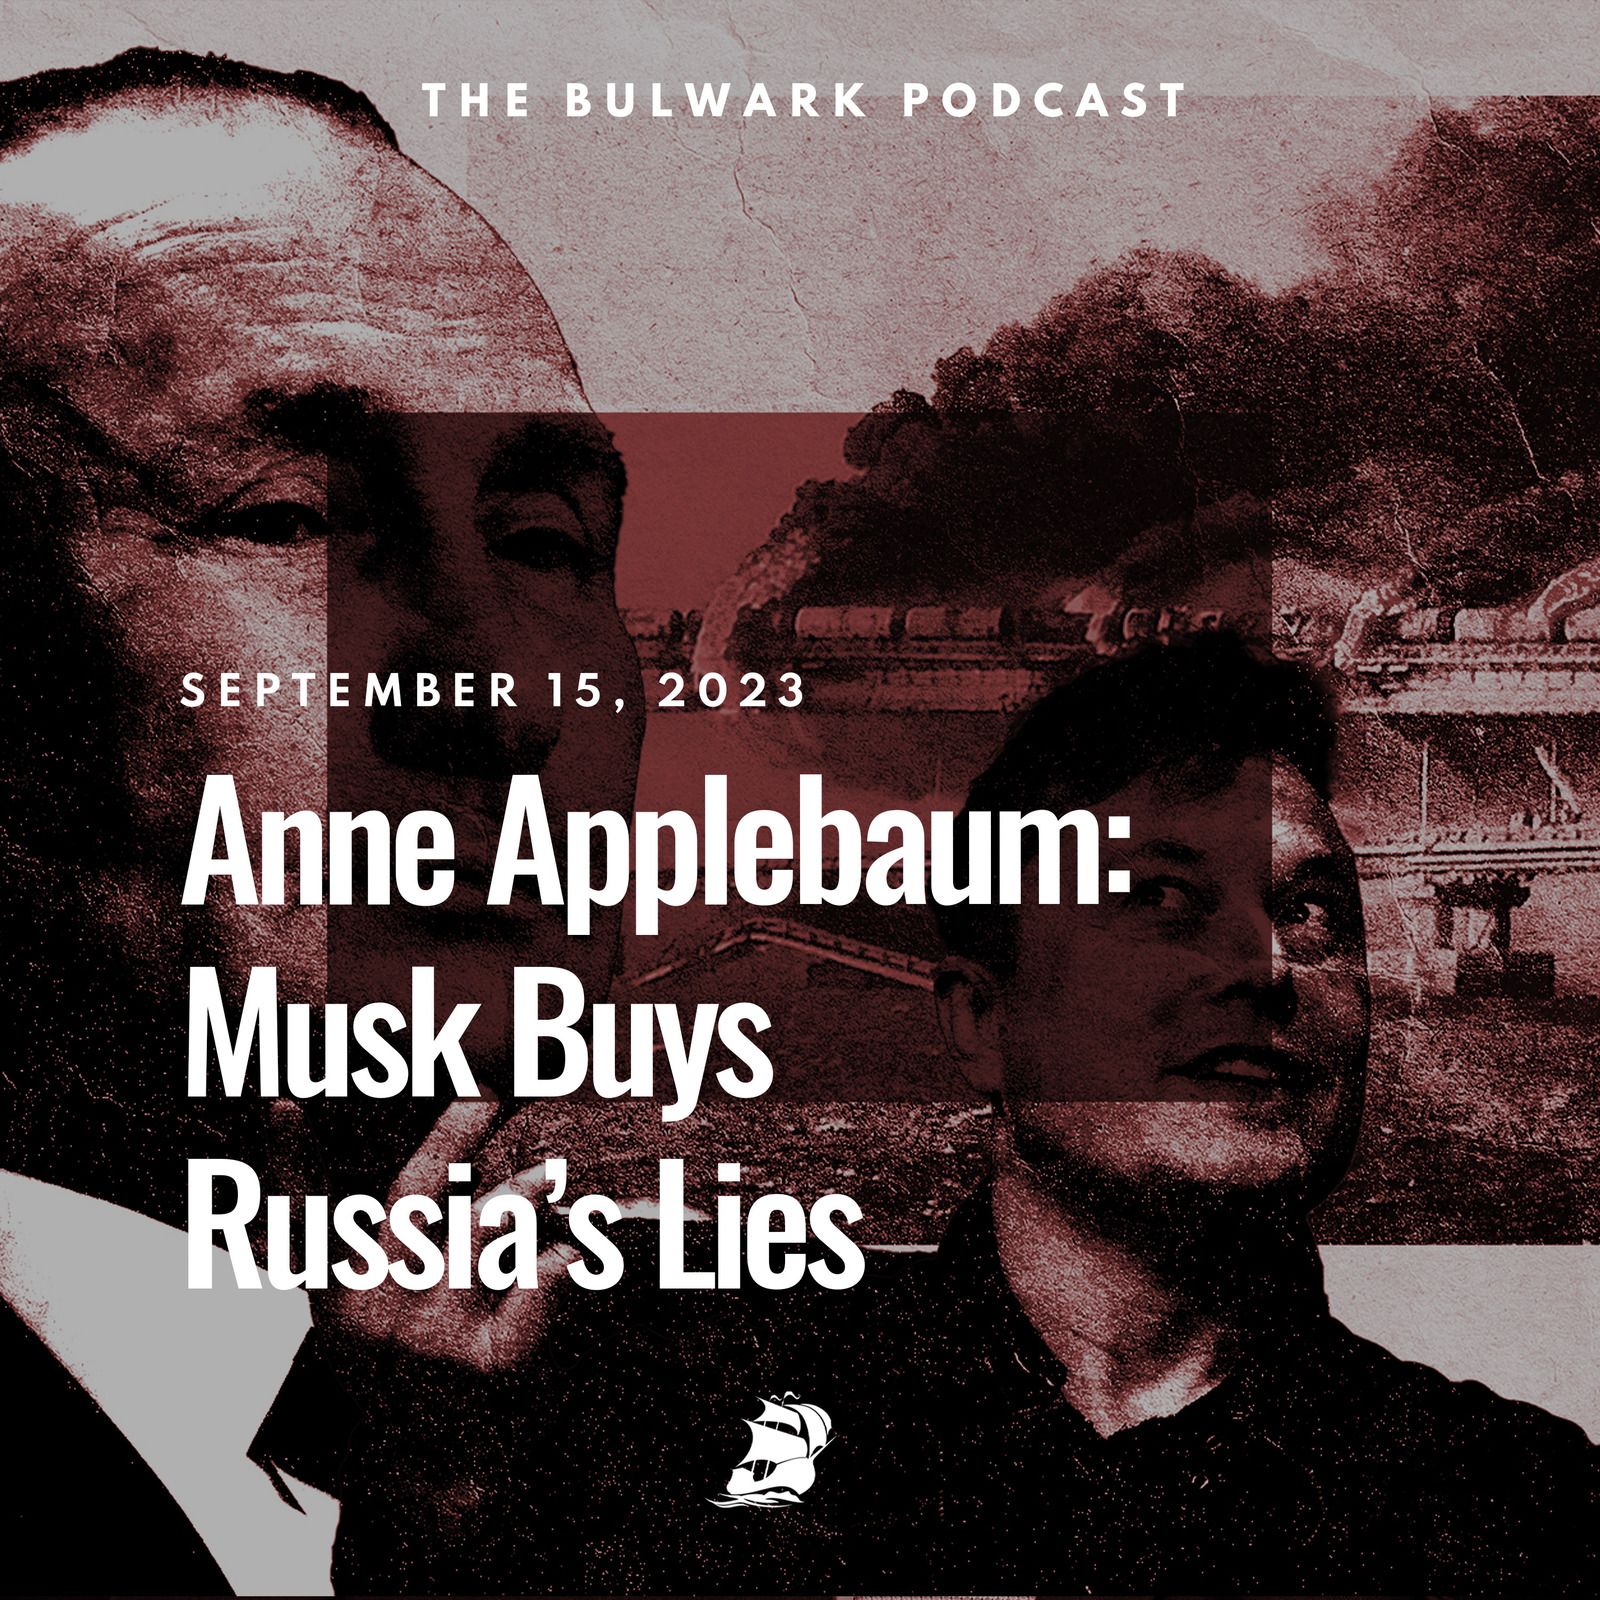 Anne Applebaum: Musk Buys Russia’s Lies by The Bulwark Podcast